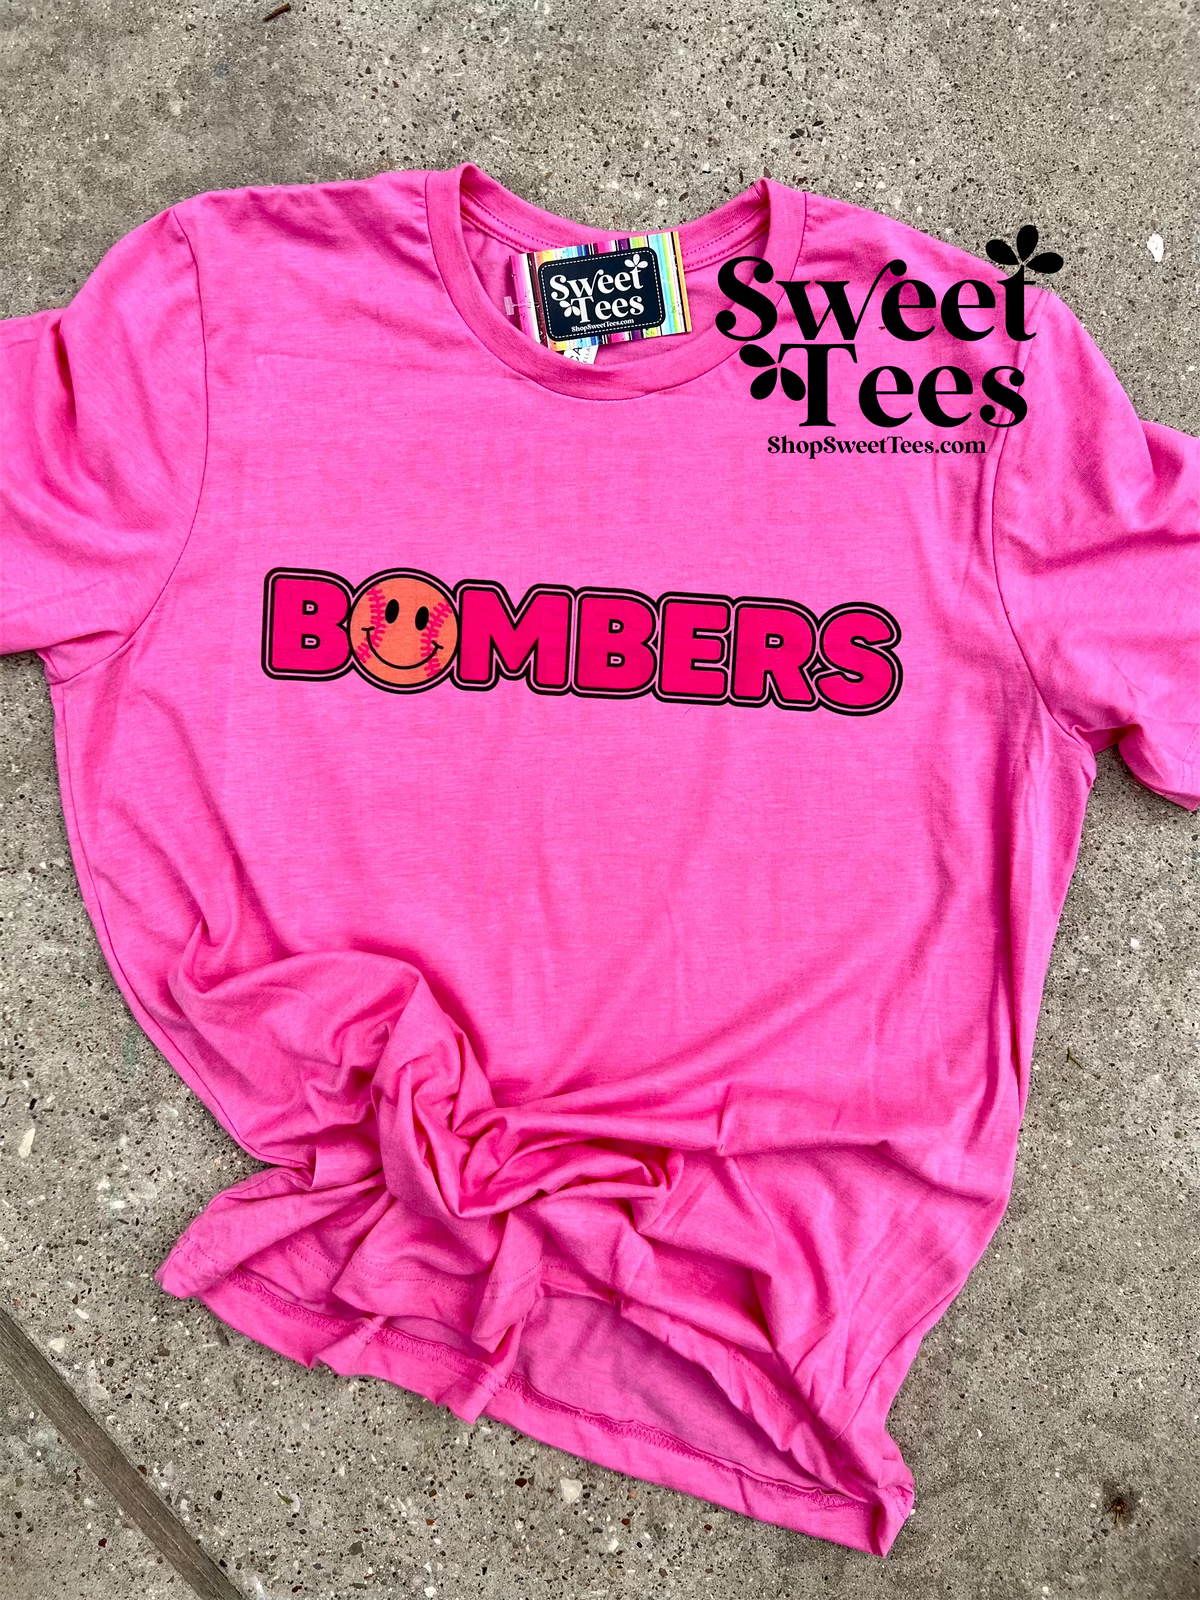 Bombers Smile Letter tee